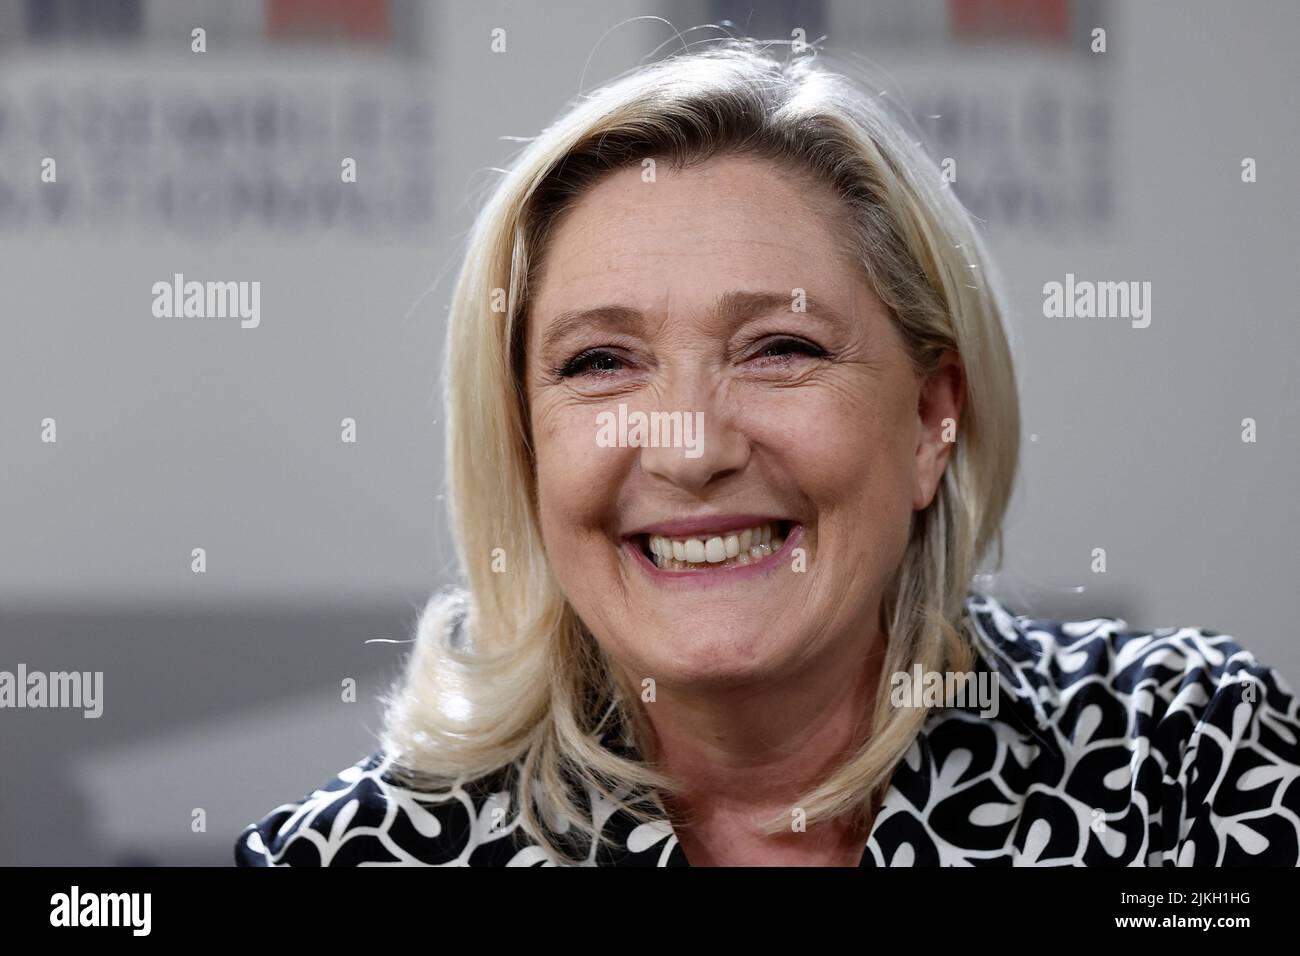 Marine Le Pen, member of parliament and president of the French far-right National Rally (Rassemblement National - RN) party parliamentary group gives a news conference at the National Assembly in Paris, France, August 2, 2022. REUTERS/Benoit Tessier Stock Photo